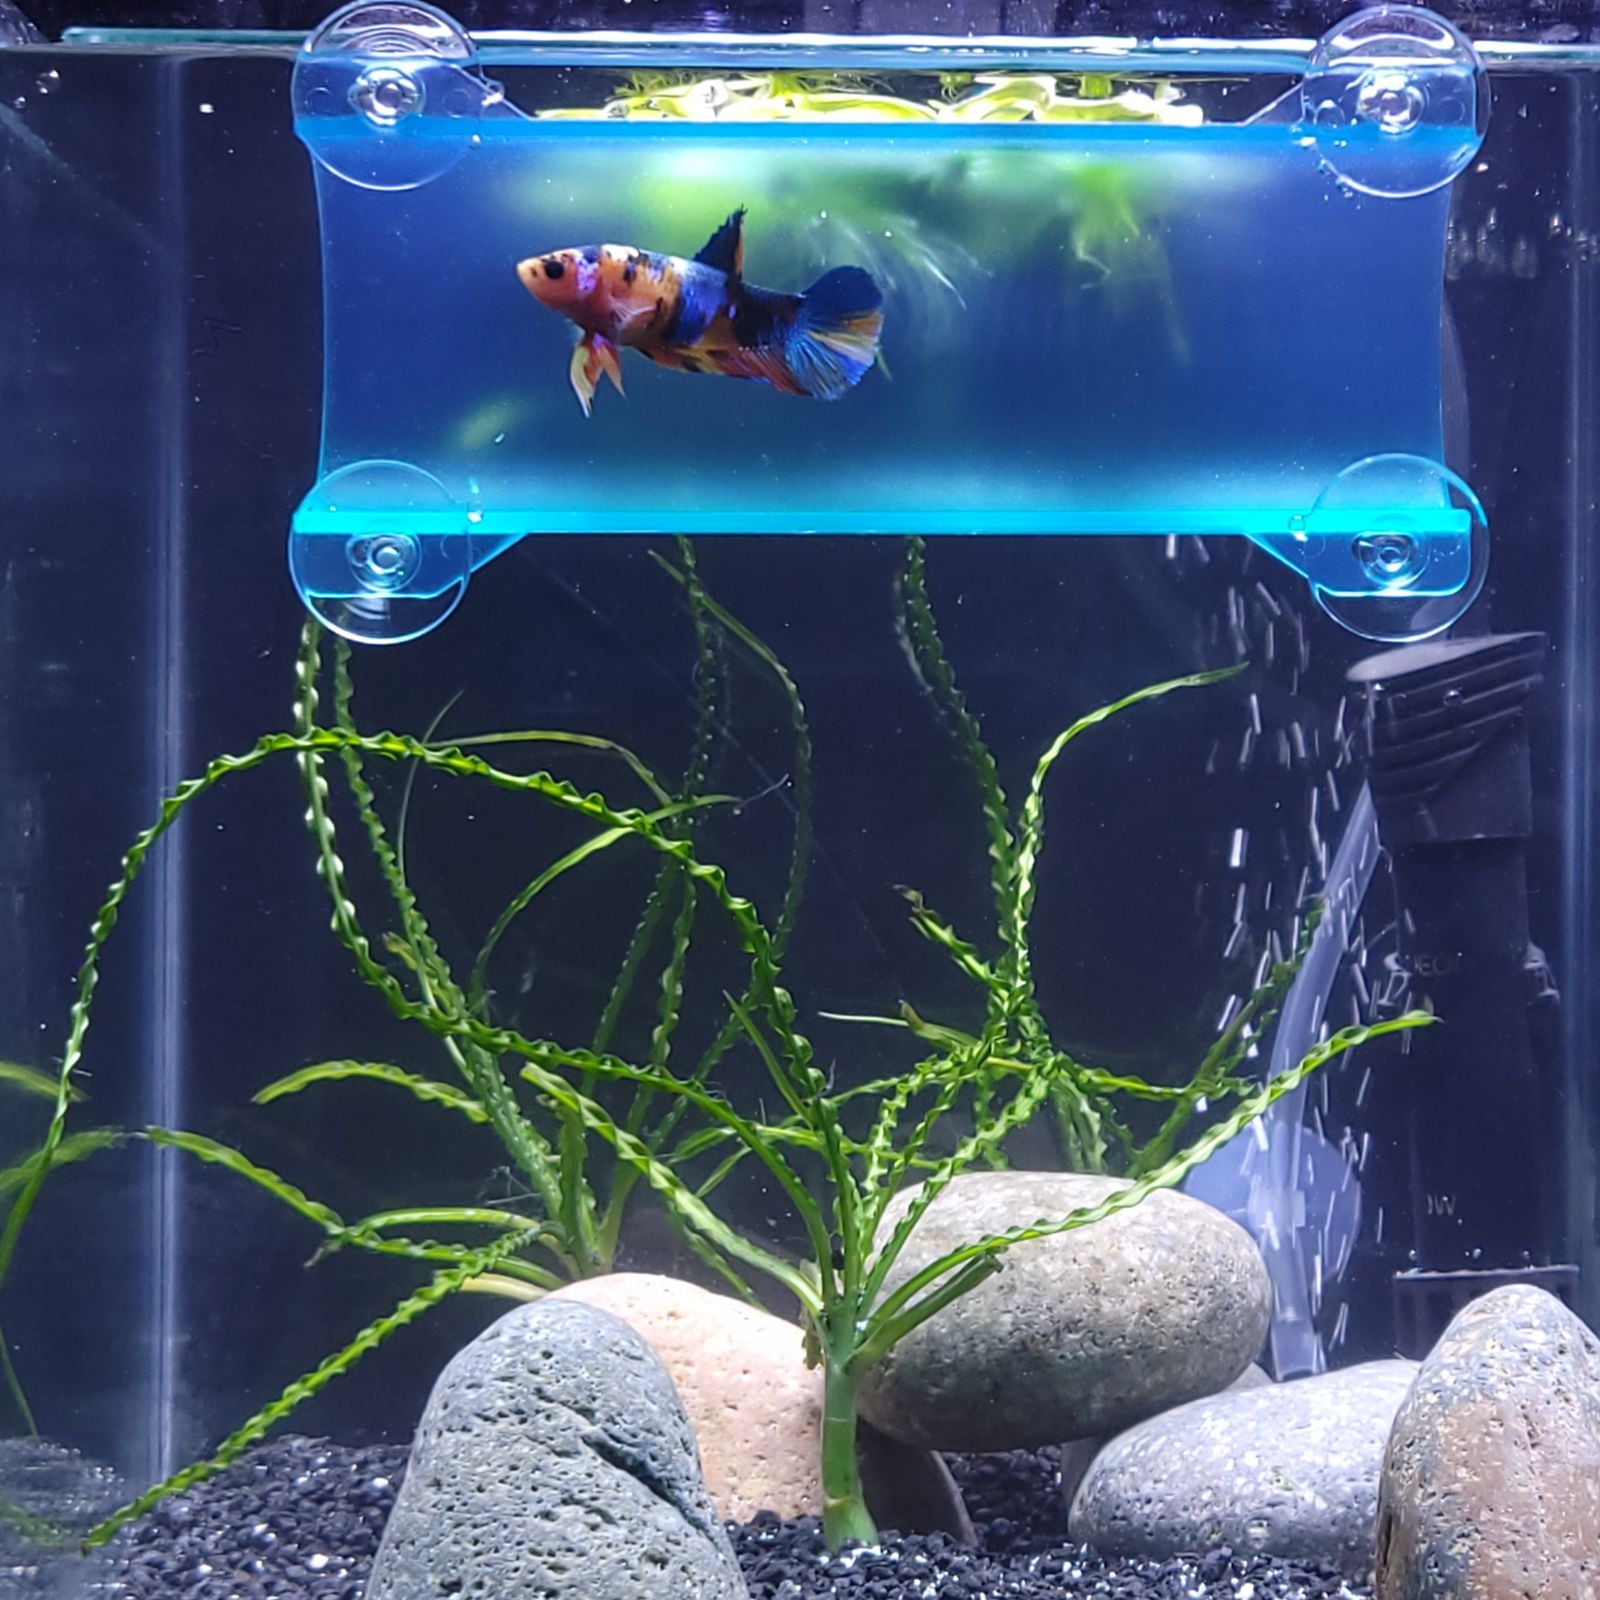 betta fish accessories - Pet Central Limited